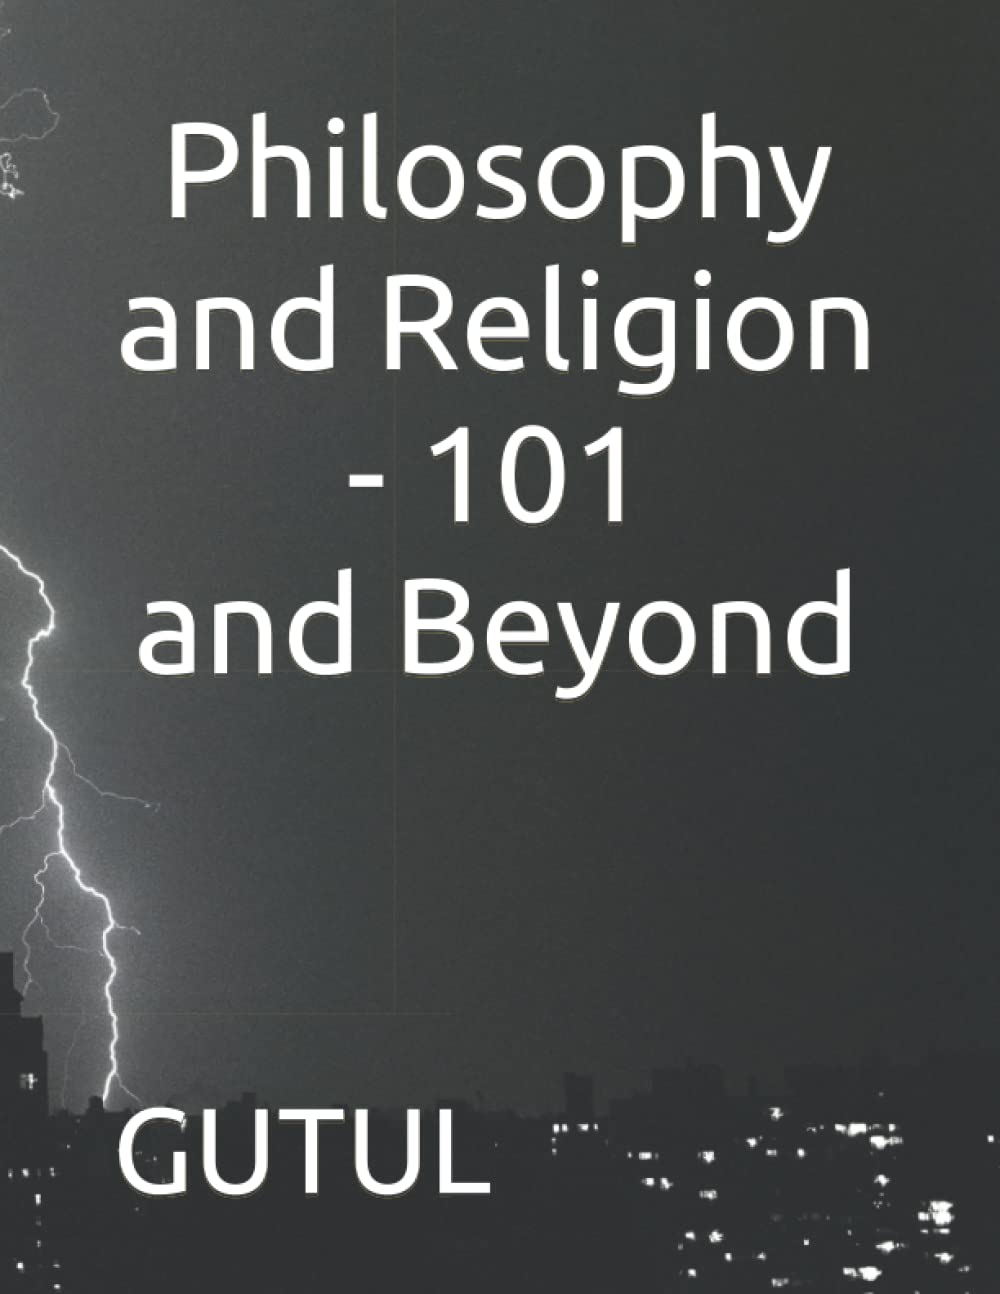 Philosophy and Religion - 101 and Beyond